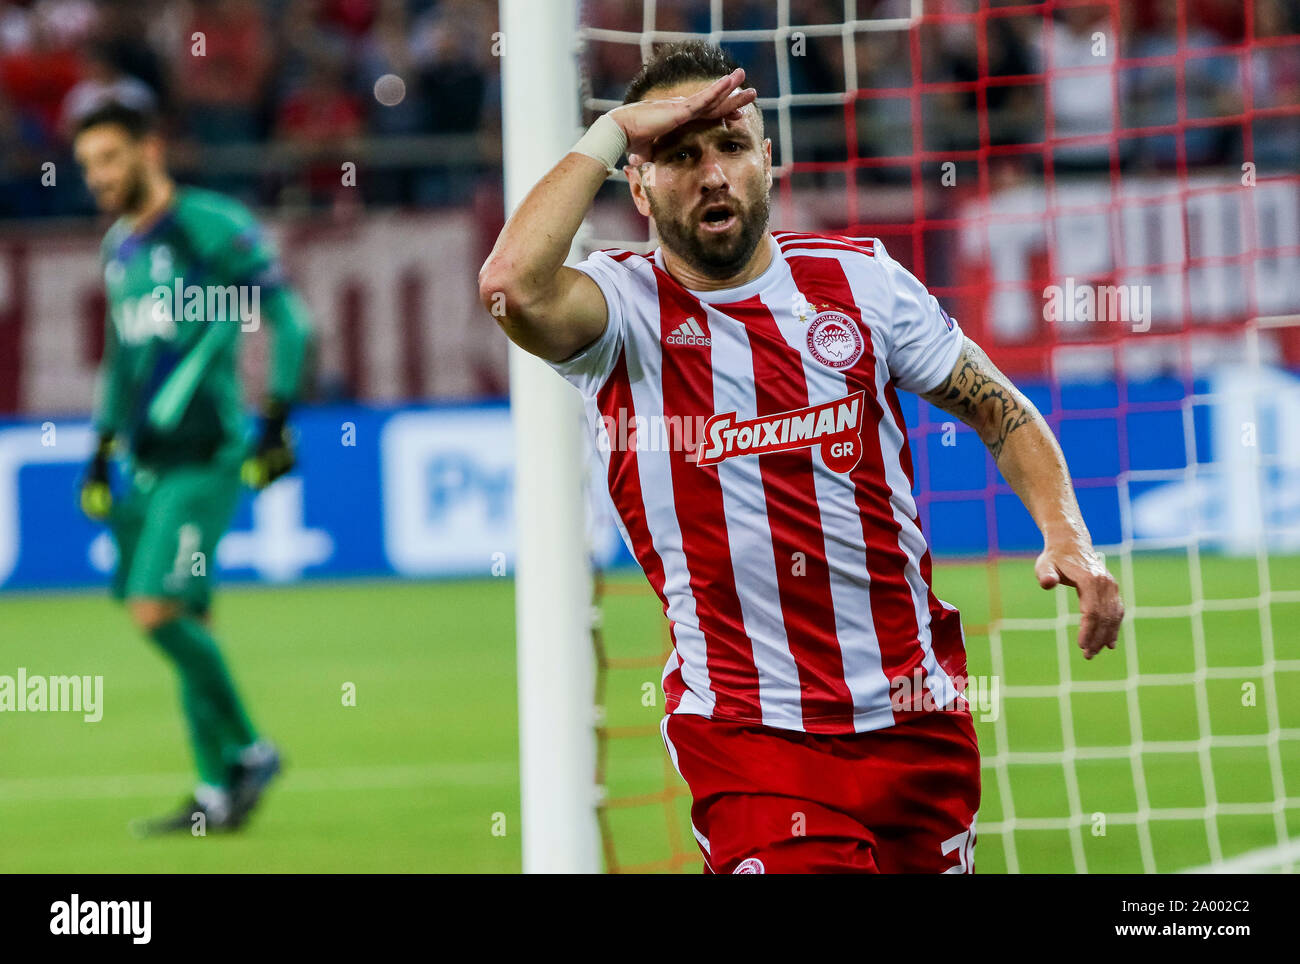 Piraeus, Greece. 18th Sep, 2019. Olympiacos' Mathieu Valbuena celebrates  his goal during the UEFA Champions League group B soccer match between  Olympiacos and Tottenham held in Piraeus, Greece, Sept. 18, 2019. Credit: